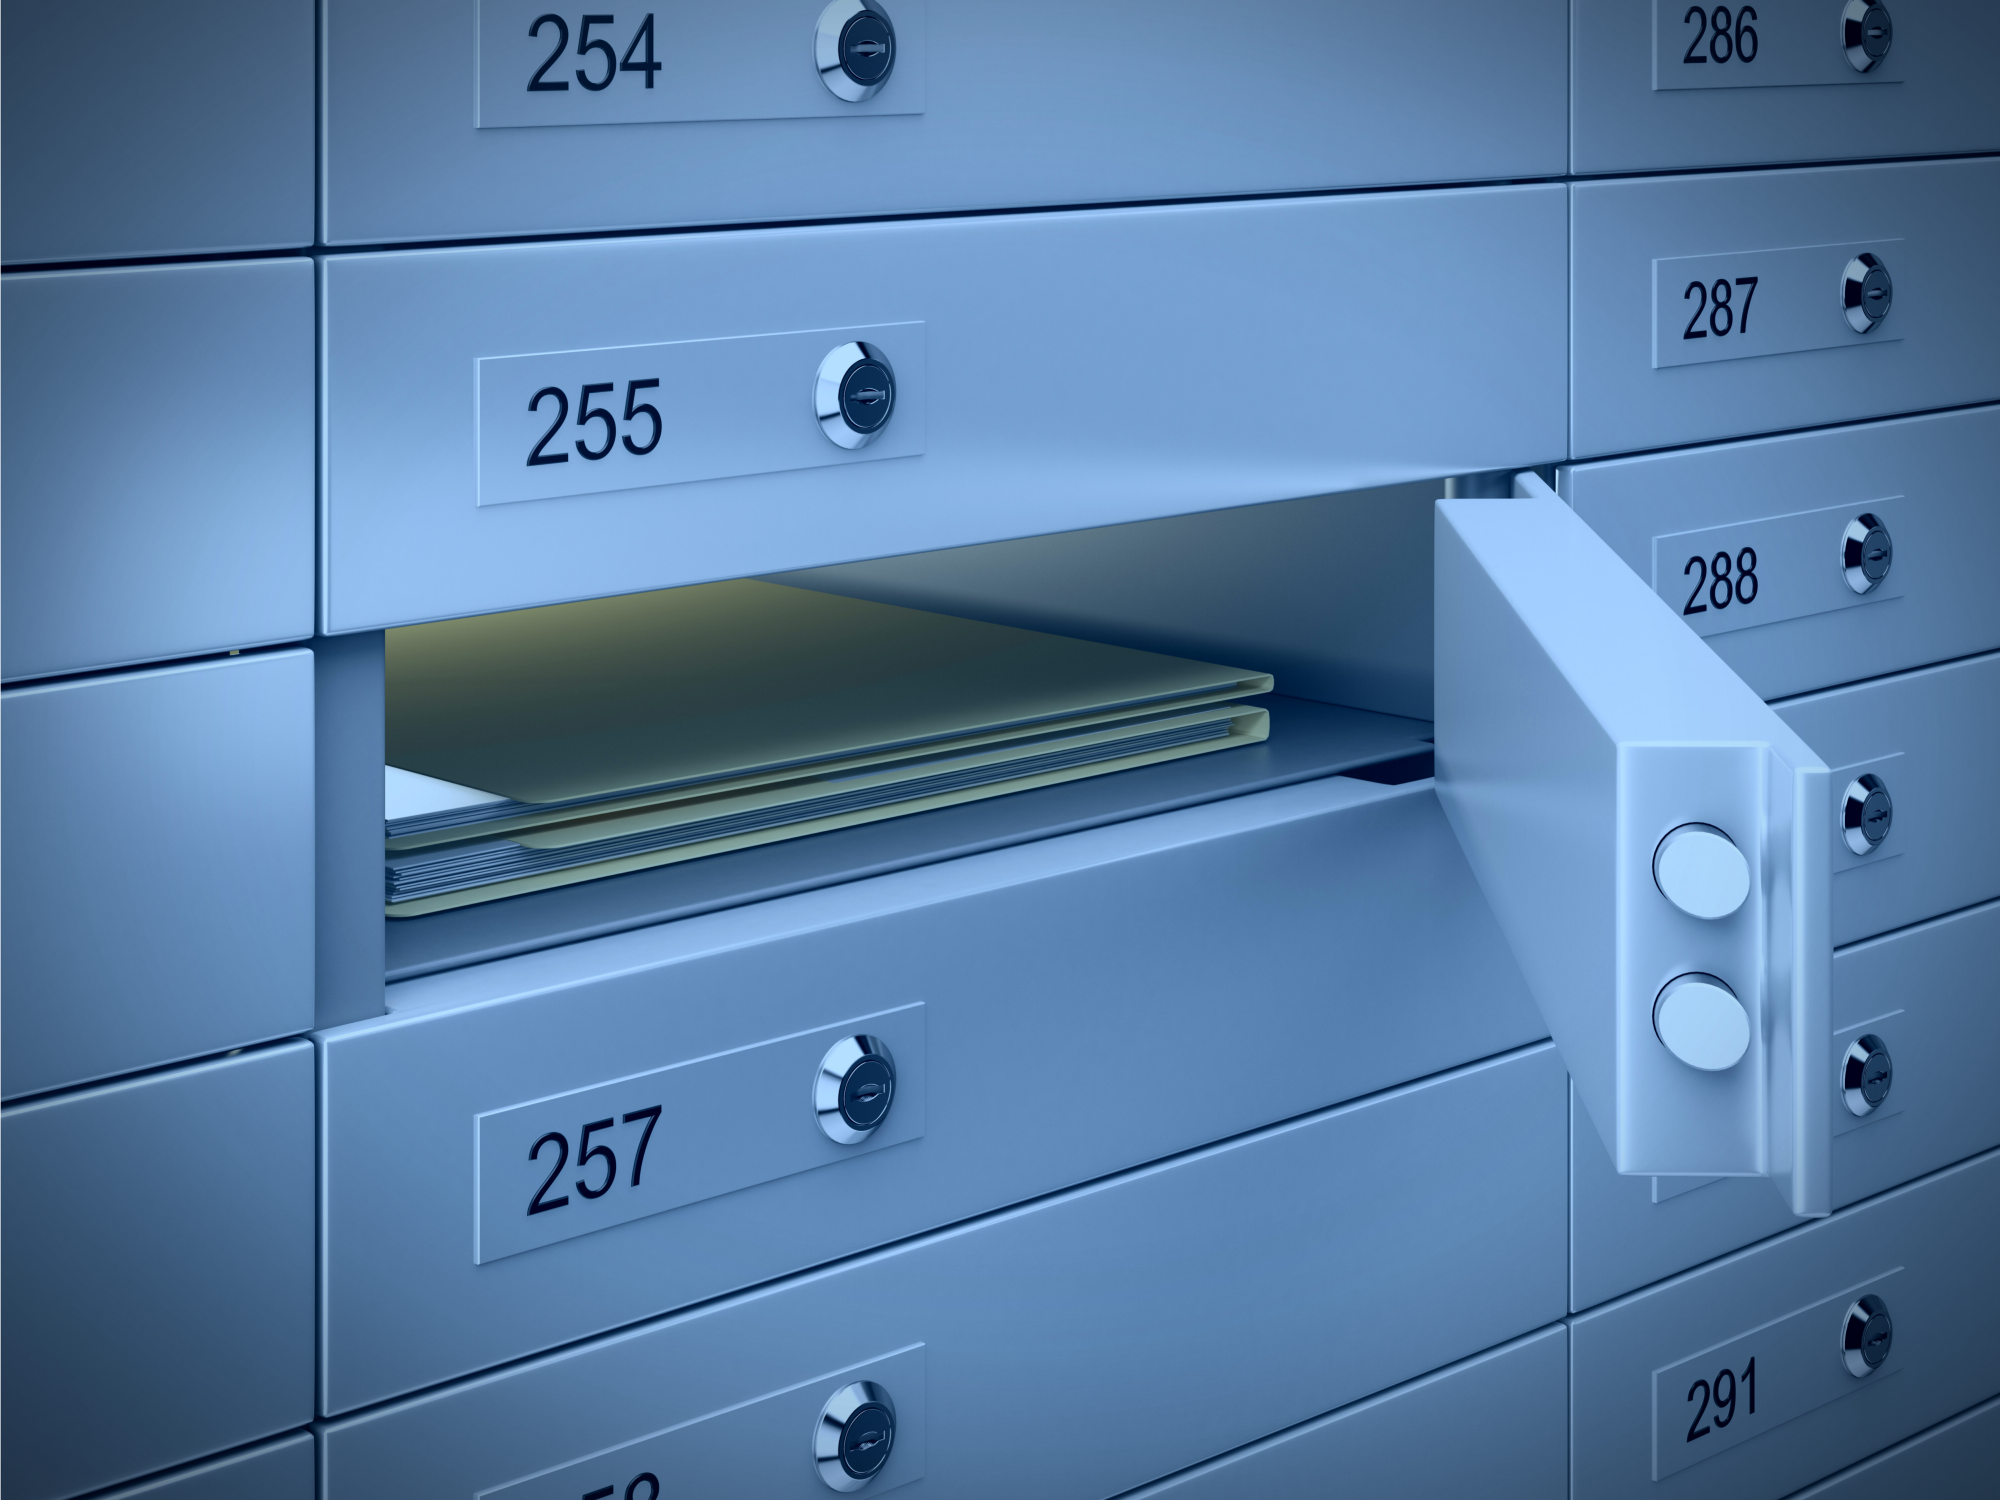 Safe deposit boxes in a bank